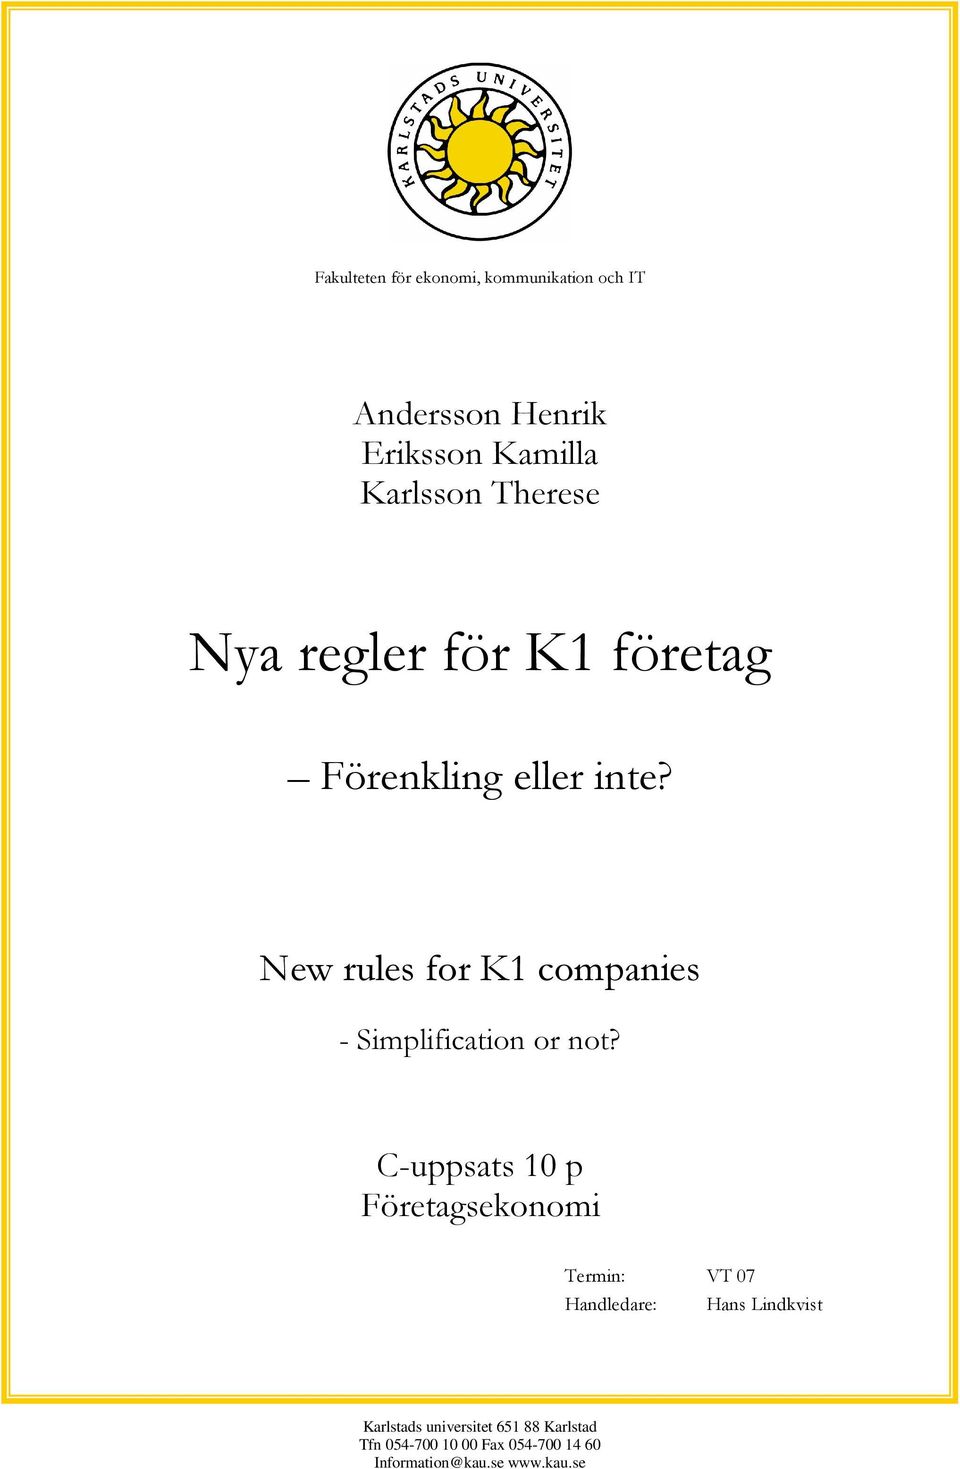 New rules for K1 companies - Simplification or not?